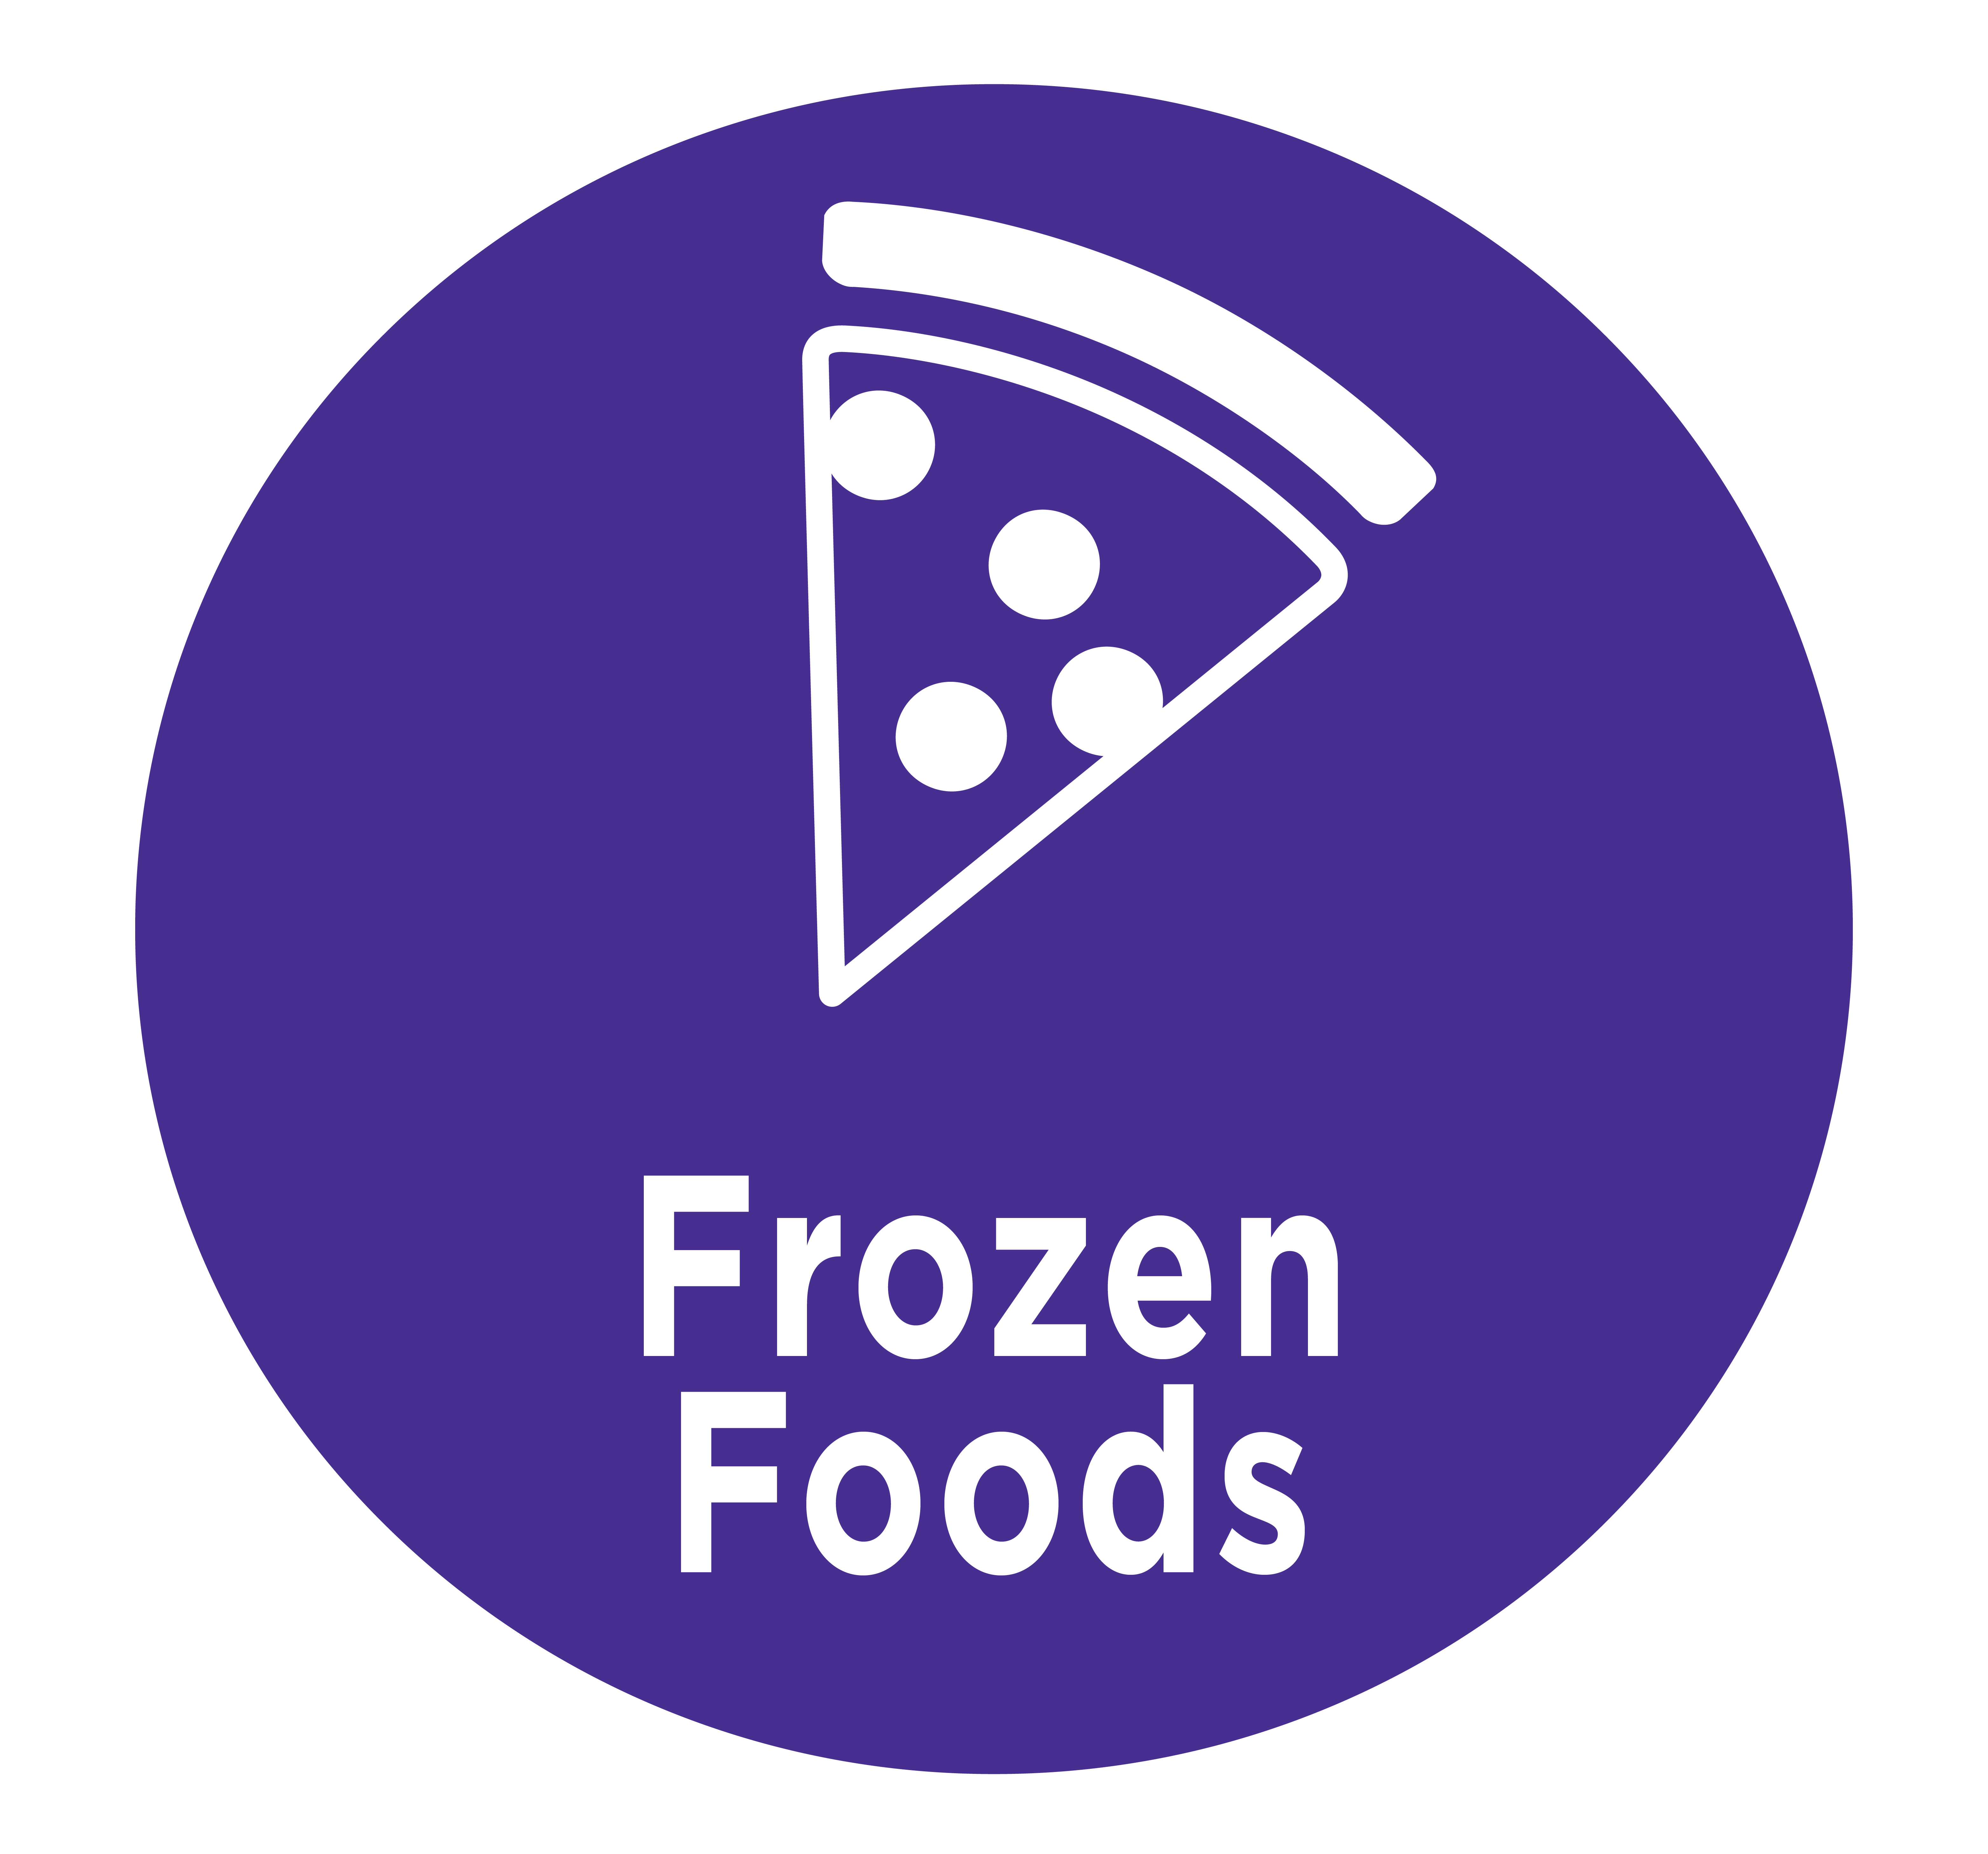 A slice of pizza representing frozen foods